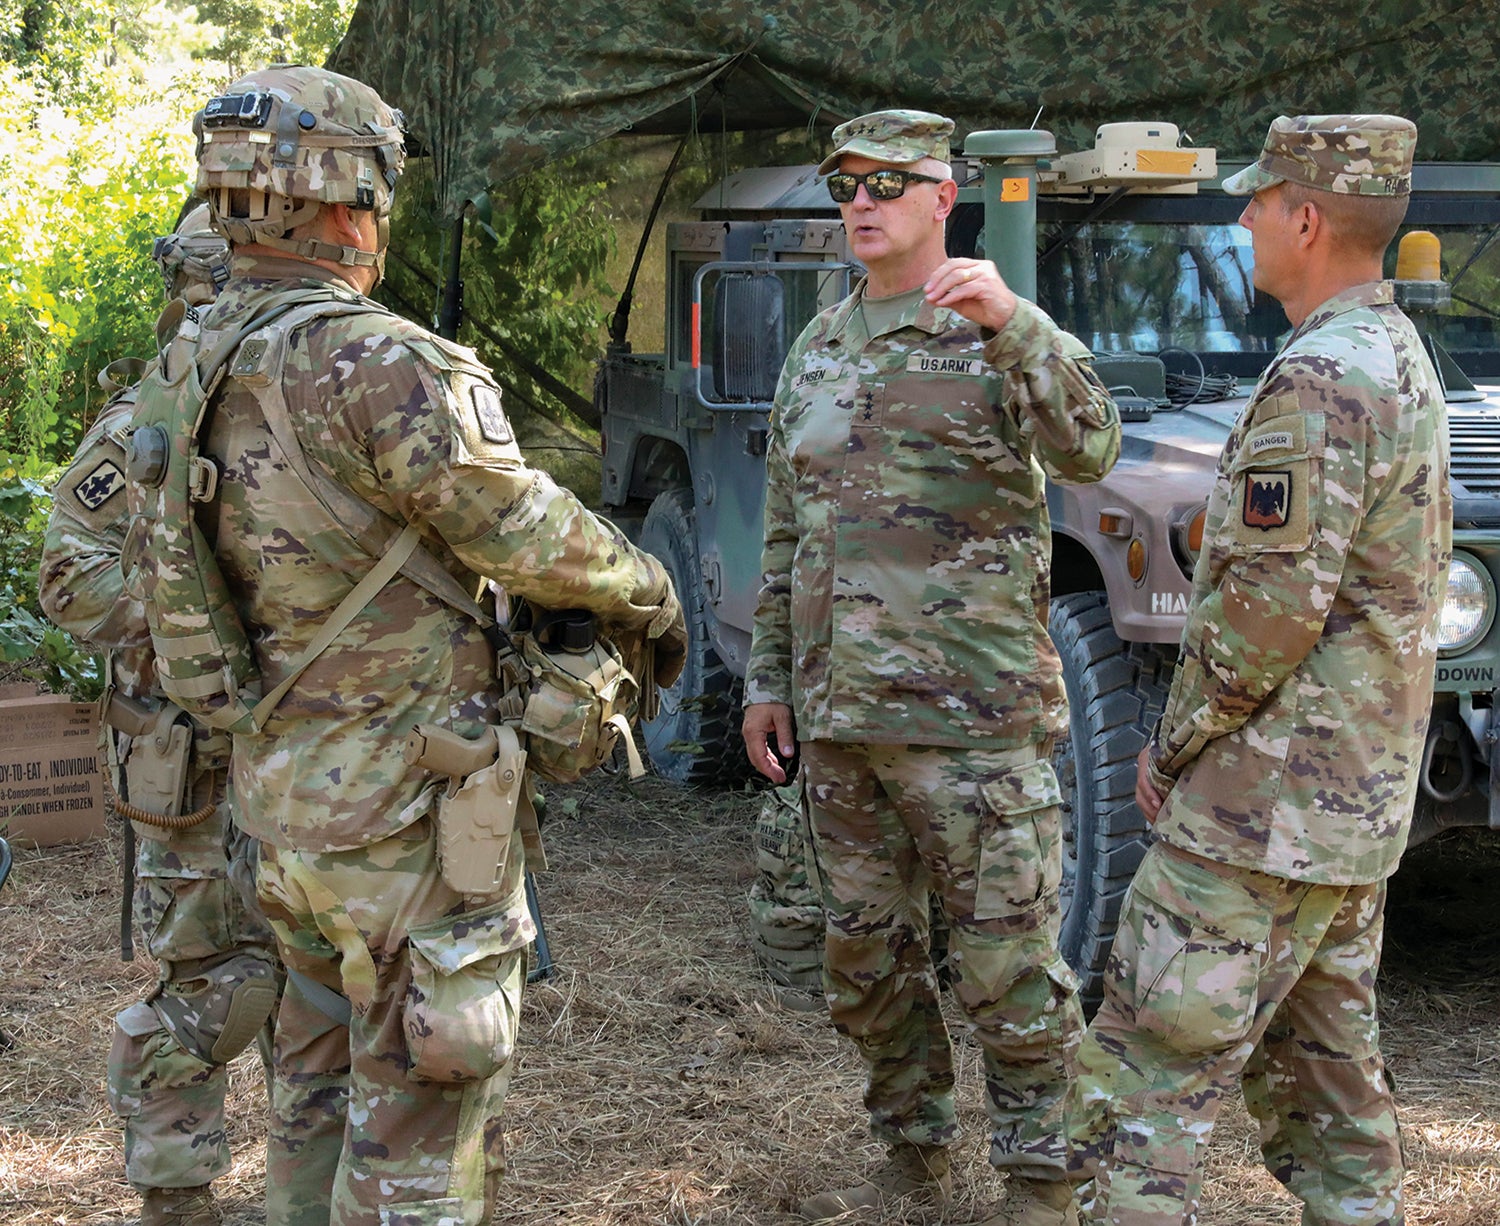 Lt. Gen. Jon Jensen, second from right, and Command Sgt. Maj. John Raines, right, Army National Guard director and senior enlisted leader, respectively, meet with leaders of the Hawaii Army National Guard’s 29th Infantry Brigade Combat Team during training at Fort Johnson, Louisiana, formerly known as Fort Polk. (Credit: Army National Guard/Spc. Sean Walker)